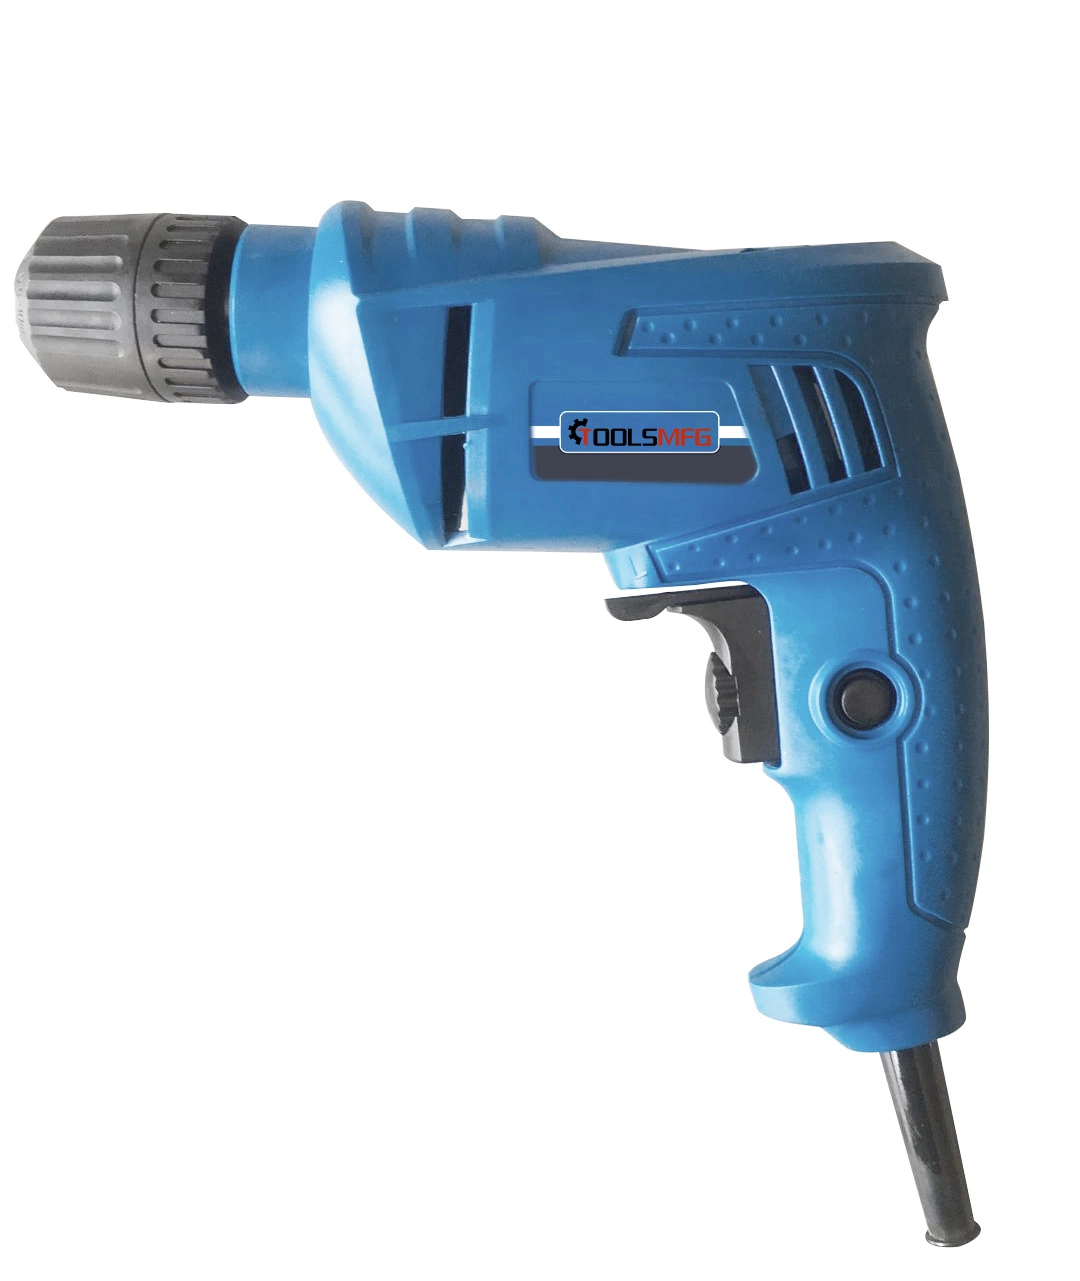 Toolsmfg 10mm 400W Electric Hand Drill From Power Tools Factory